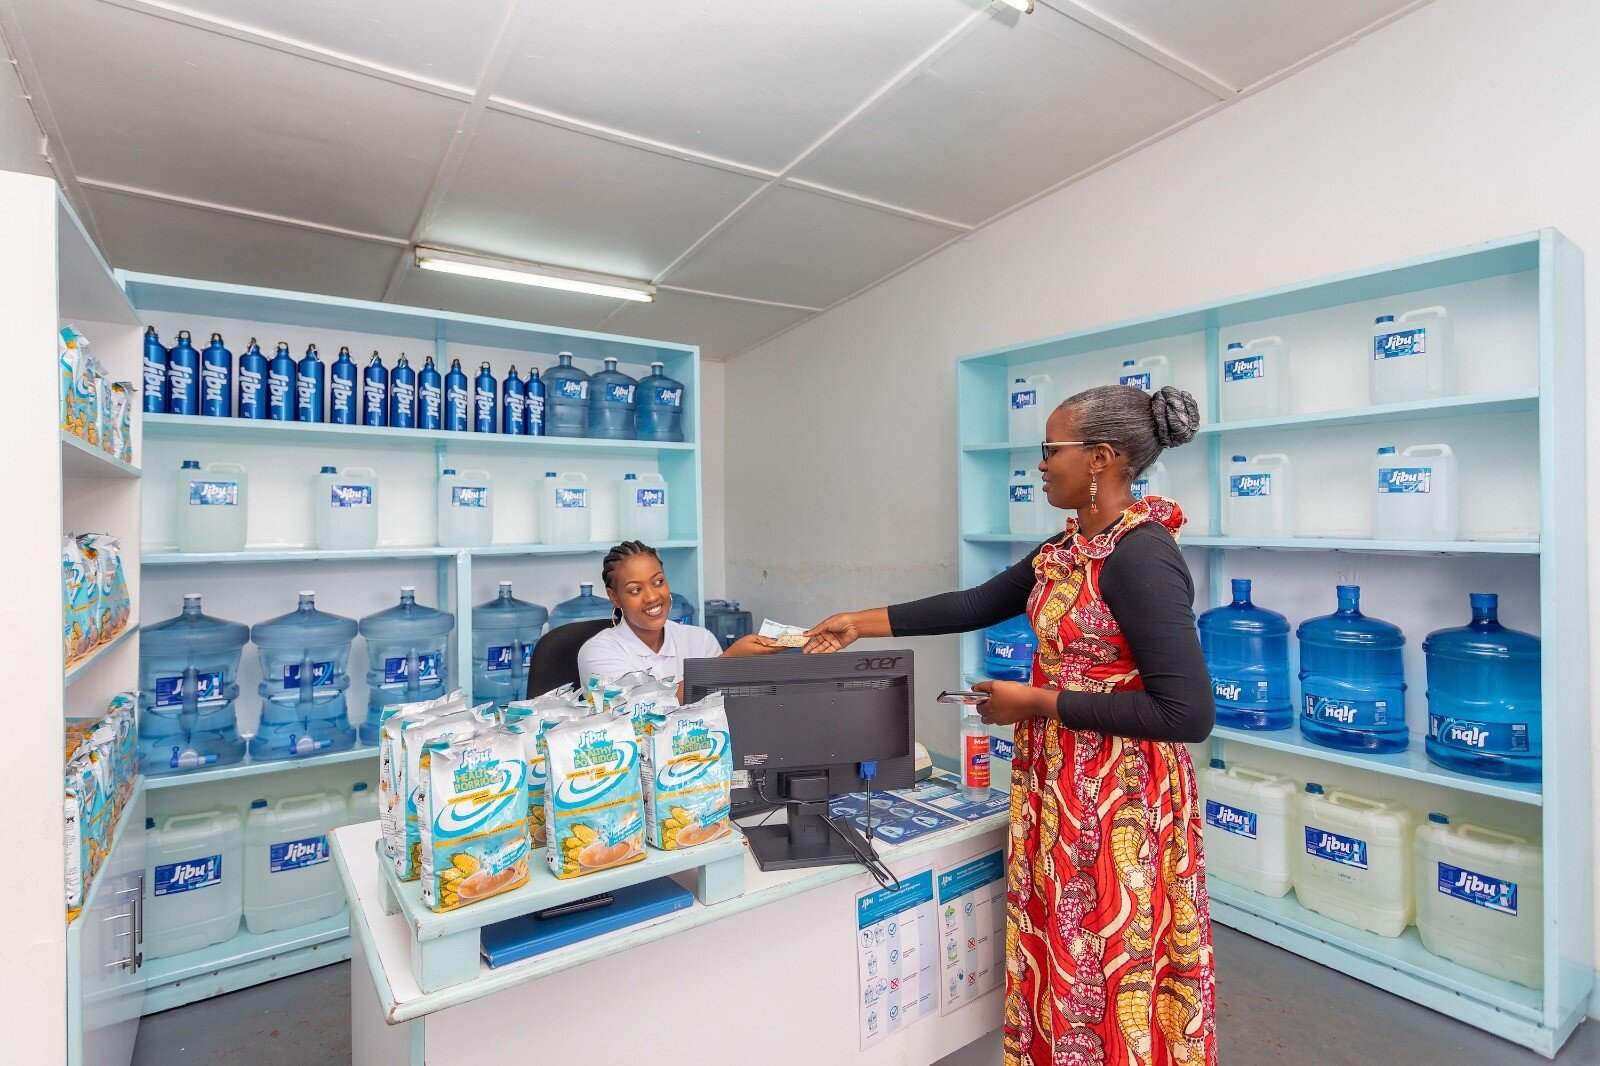 Bboxx partners with Jibu to provide clean water using IoT technology in Africa